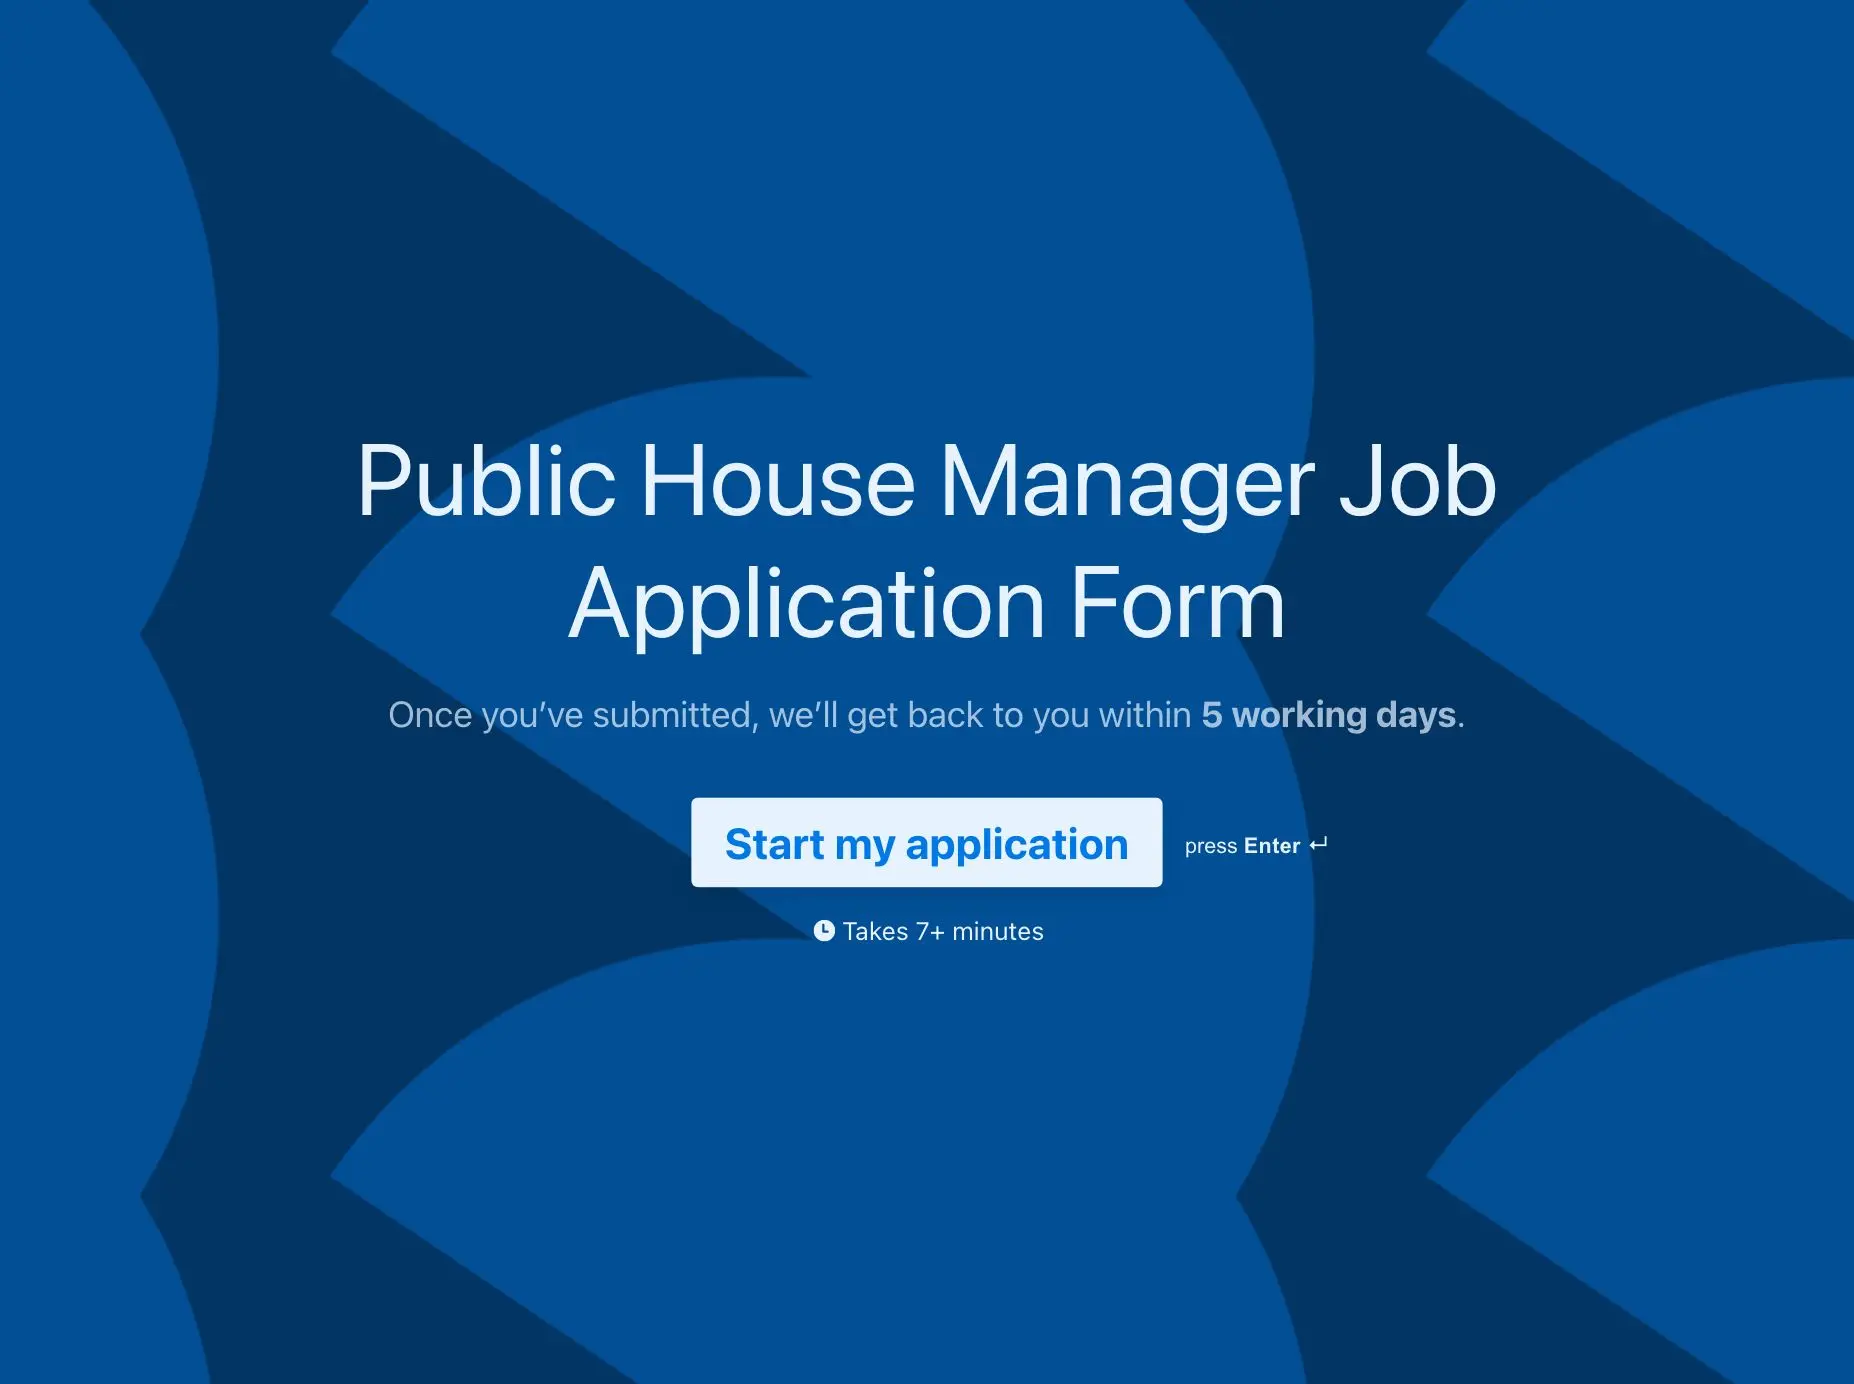 Public House Manager Job Application Form Template Hero